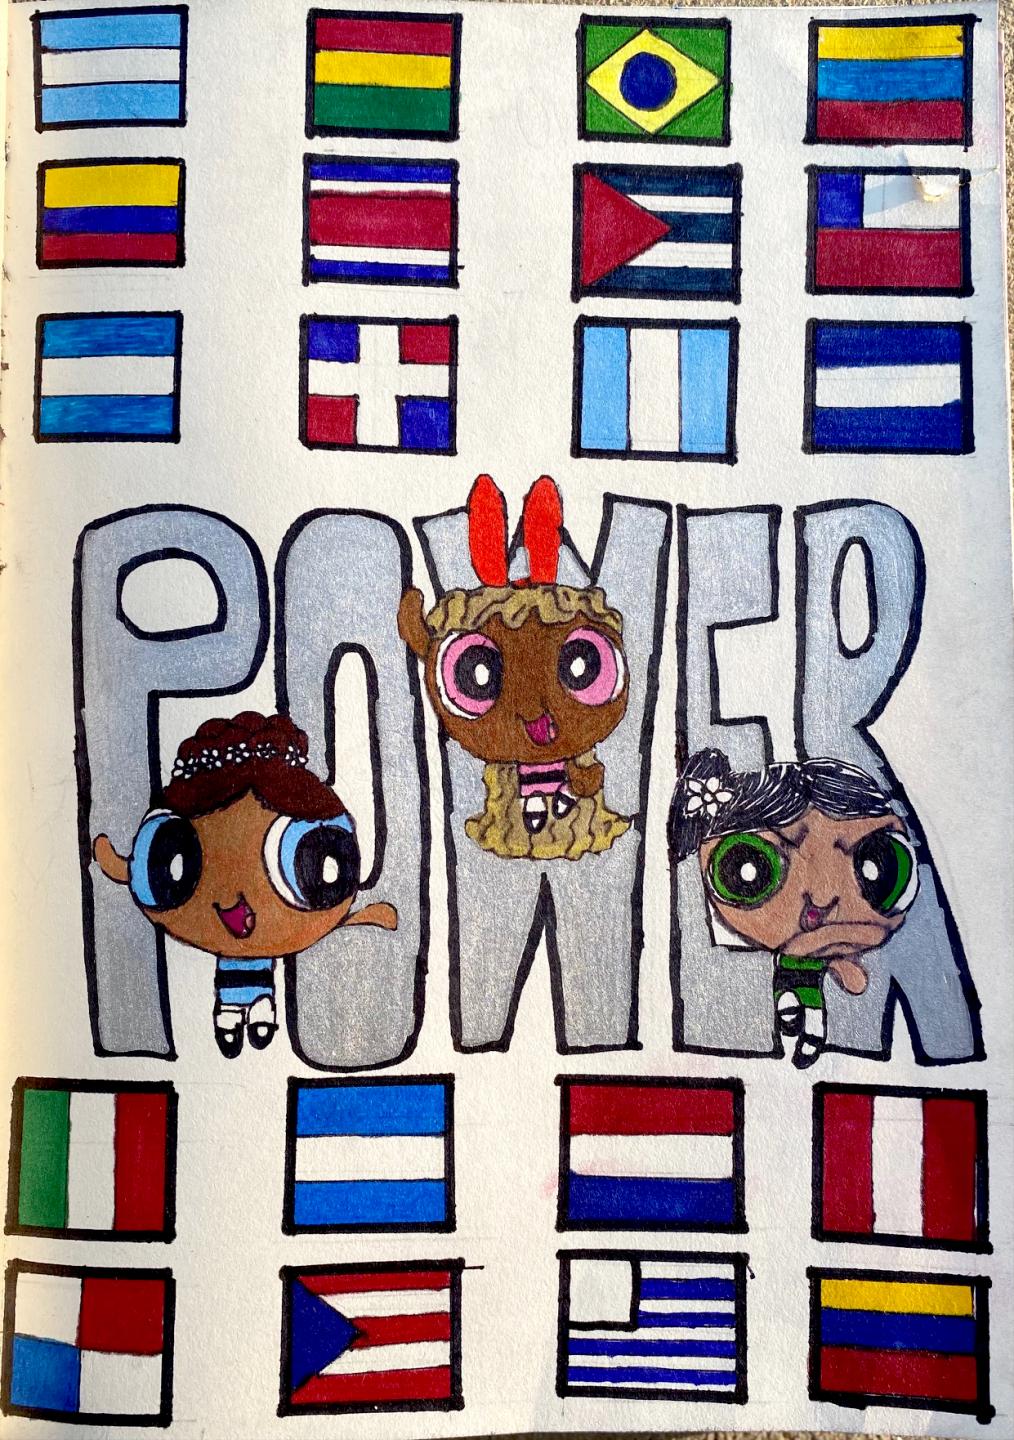 Hand drawn art showing many flags and 3 anime style gals of different colors